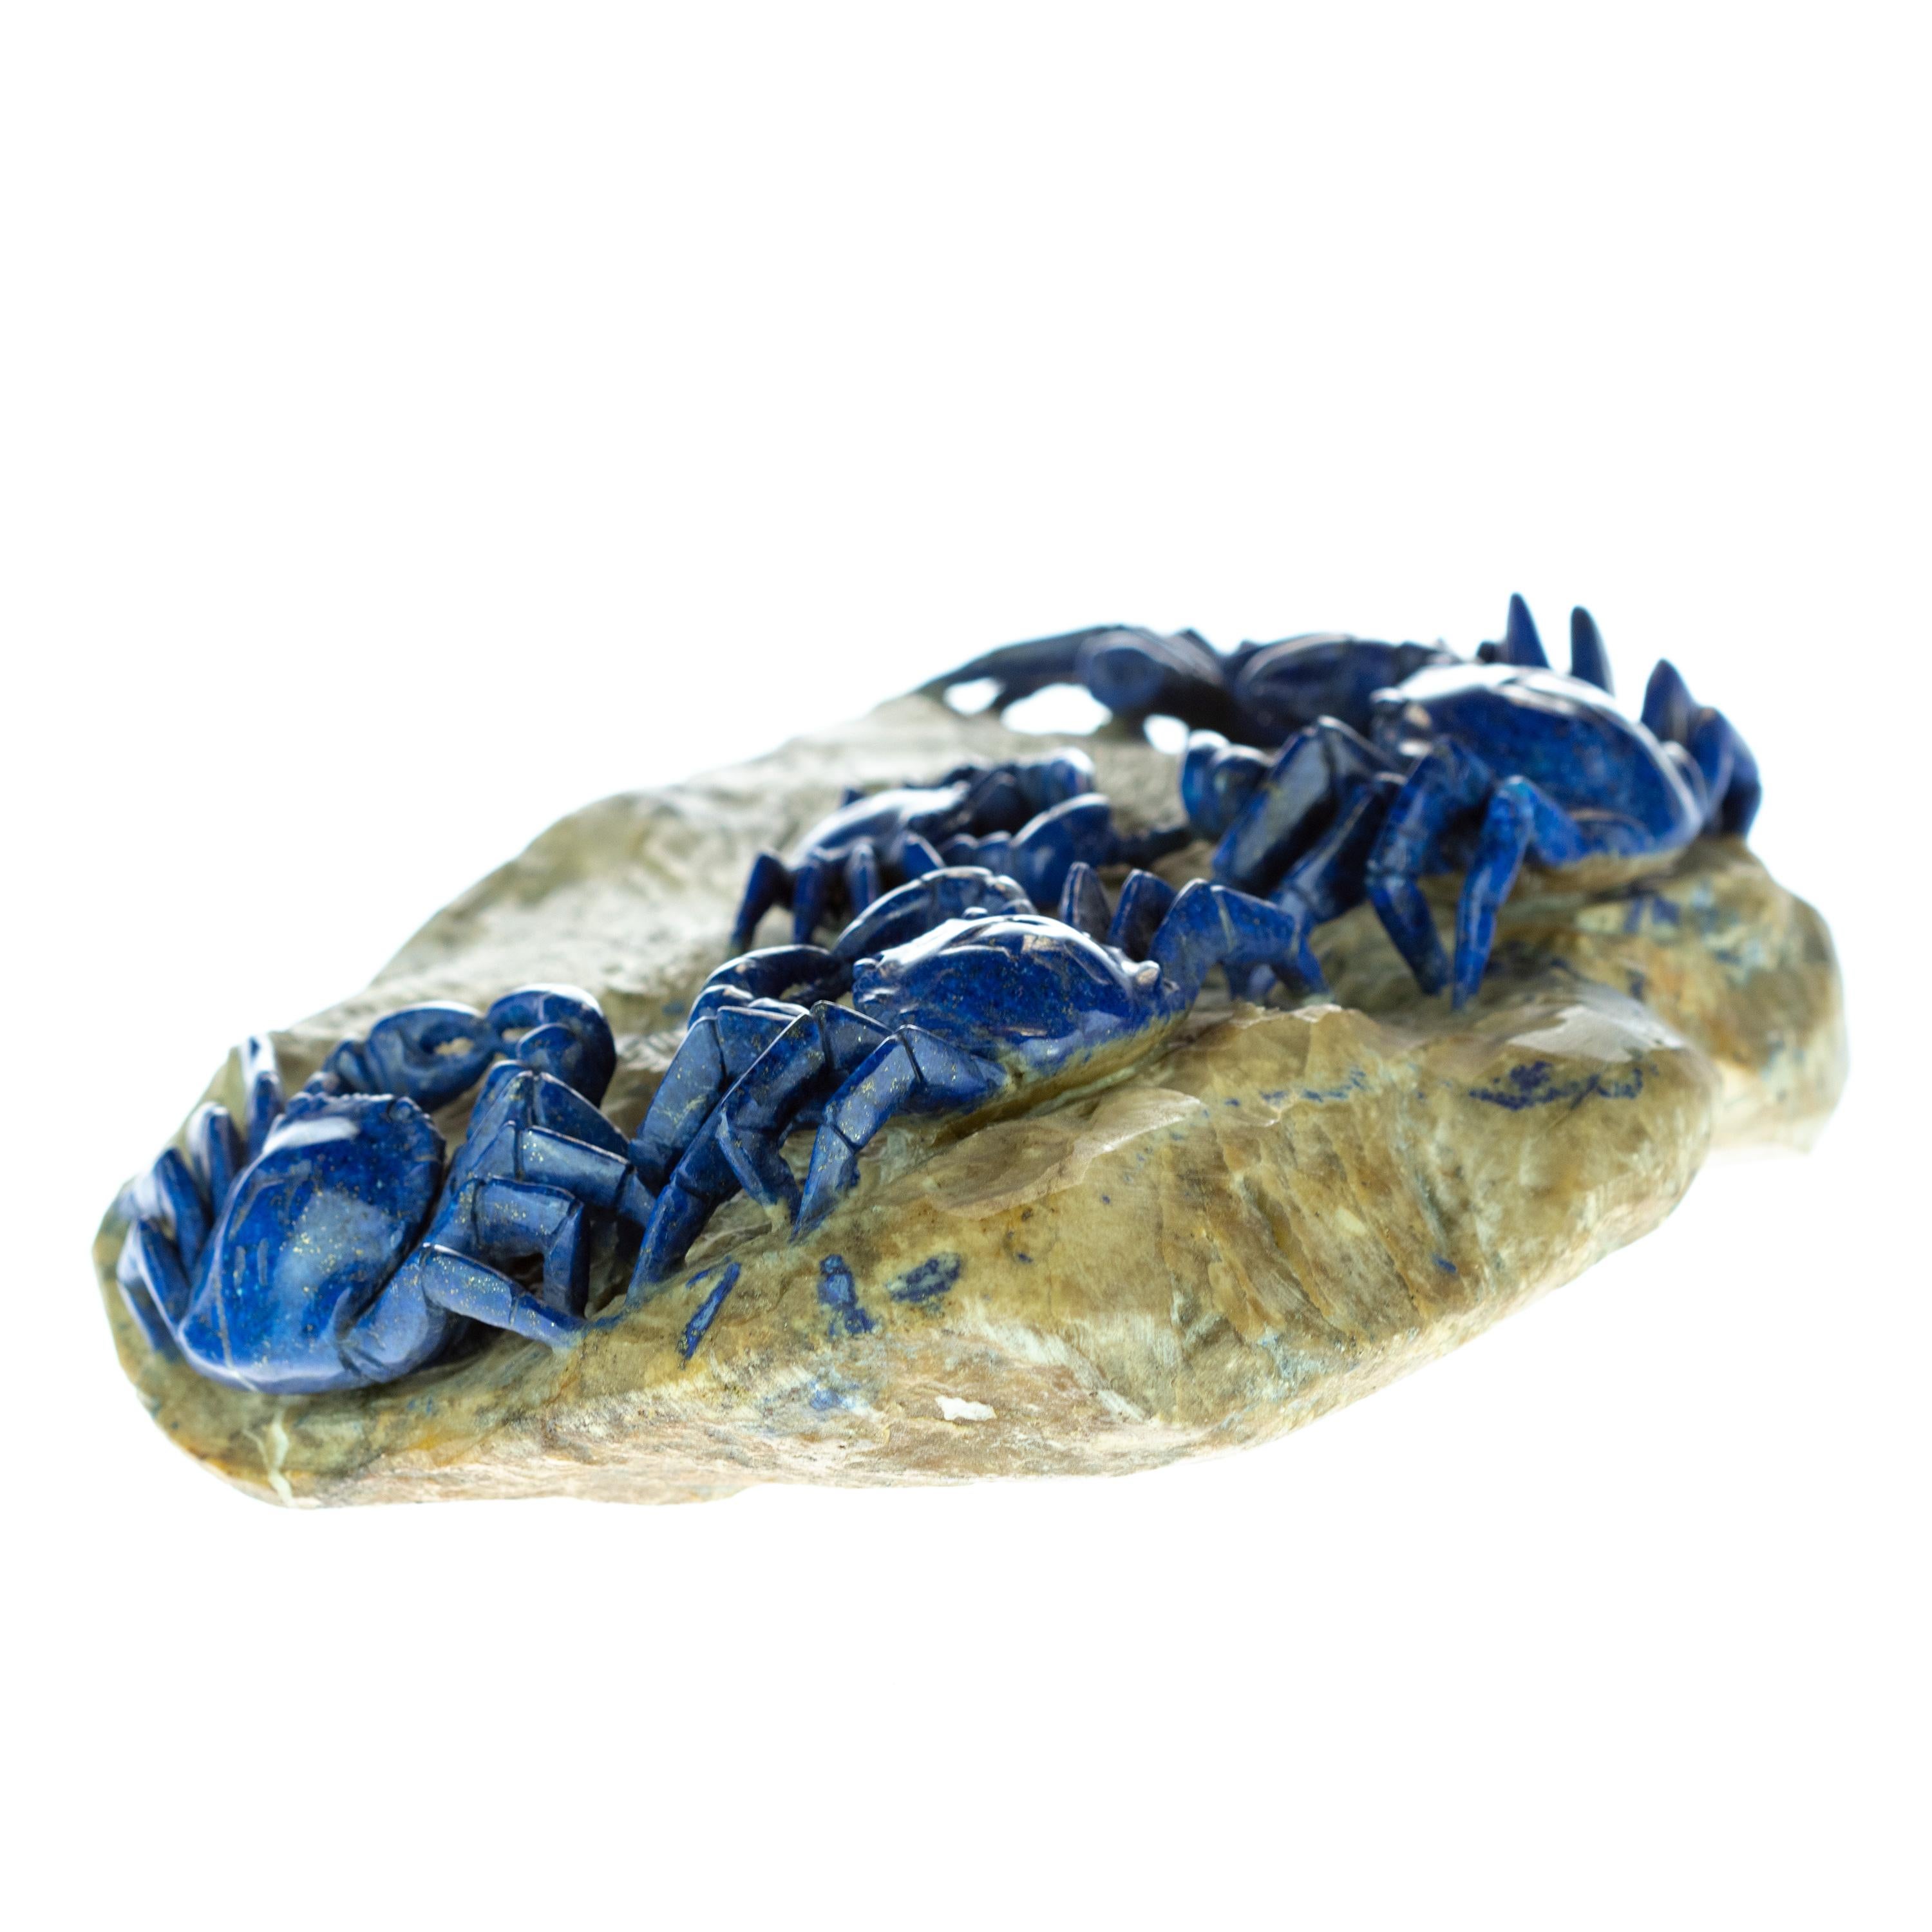 Chinese Export Lapis Lazuli Blue Crab Carved Animal Artisanal Eastern Crabs Statue Sculpture